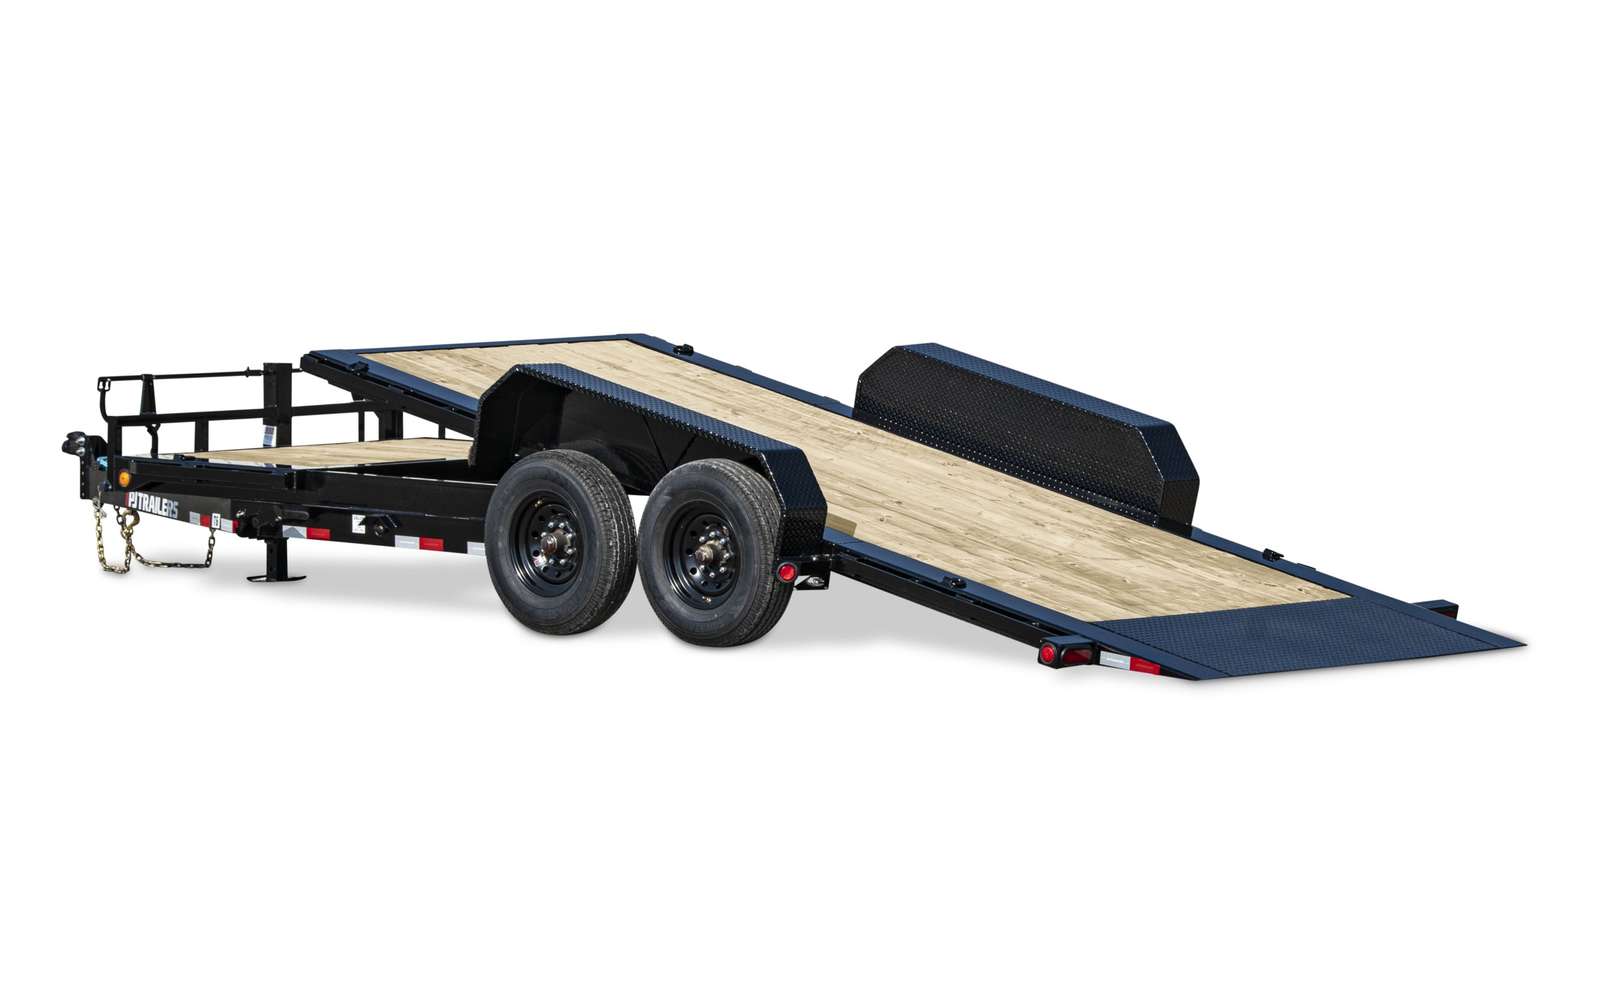 mpg towing travel trailer